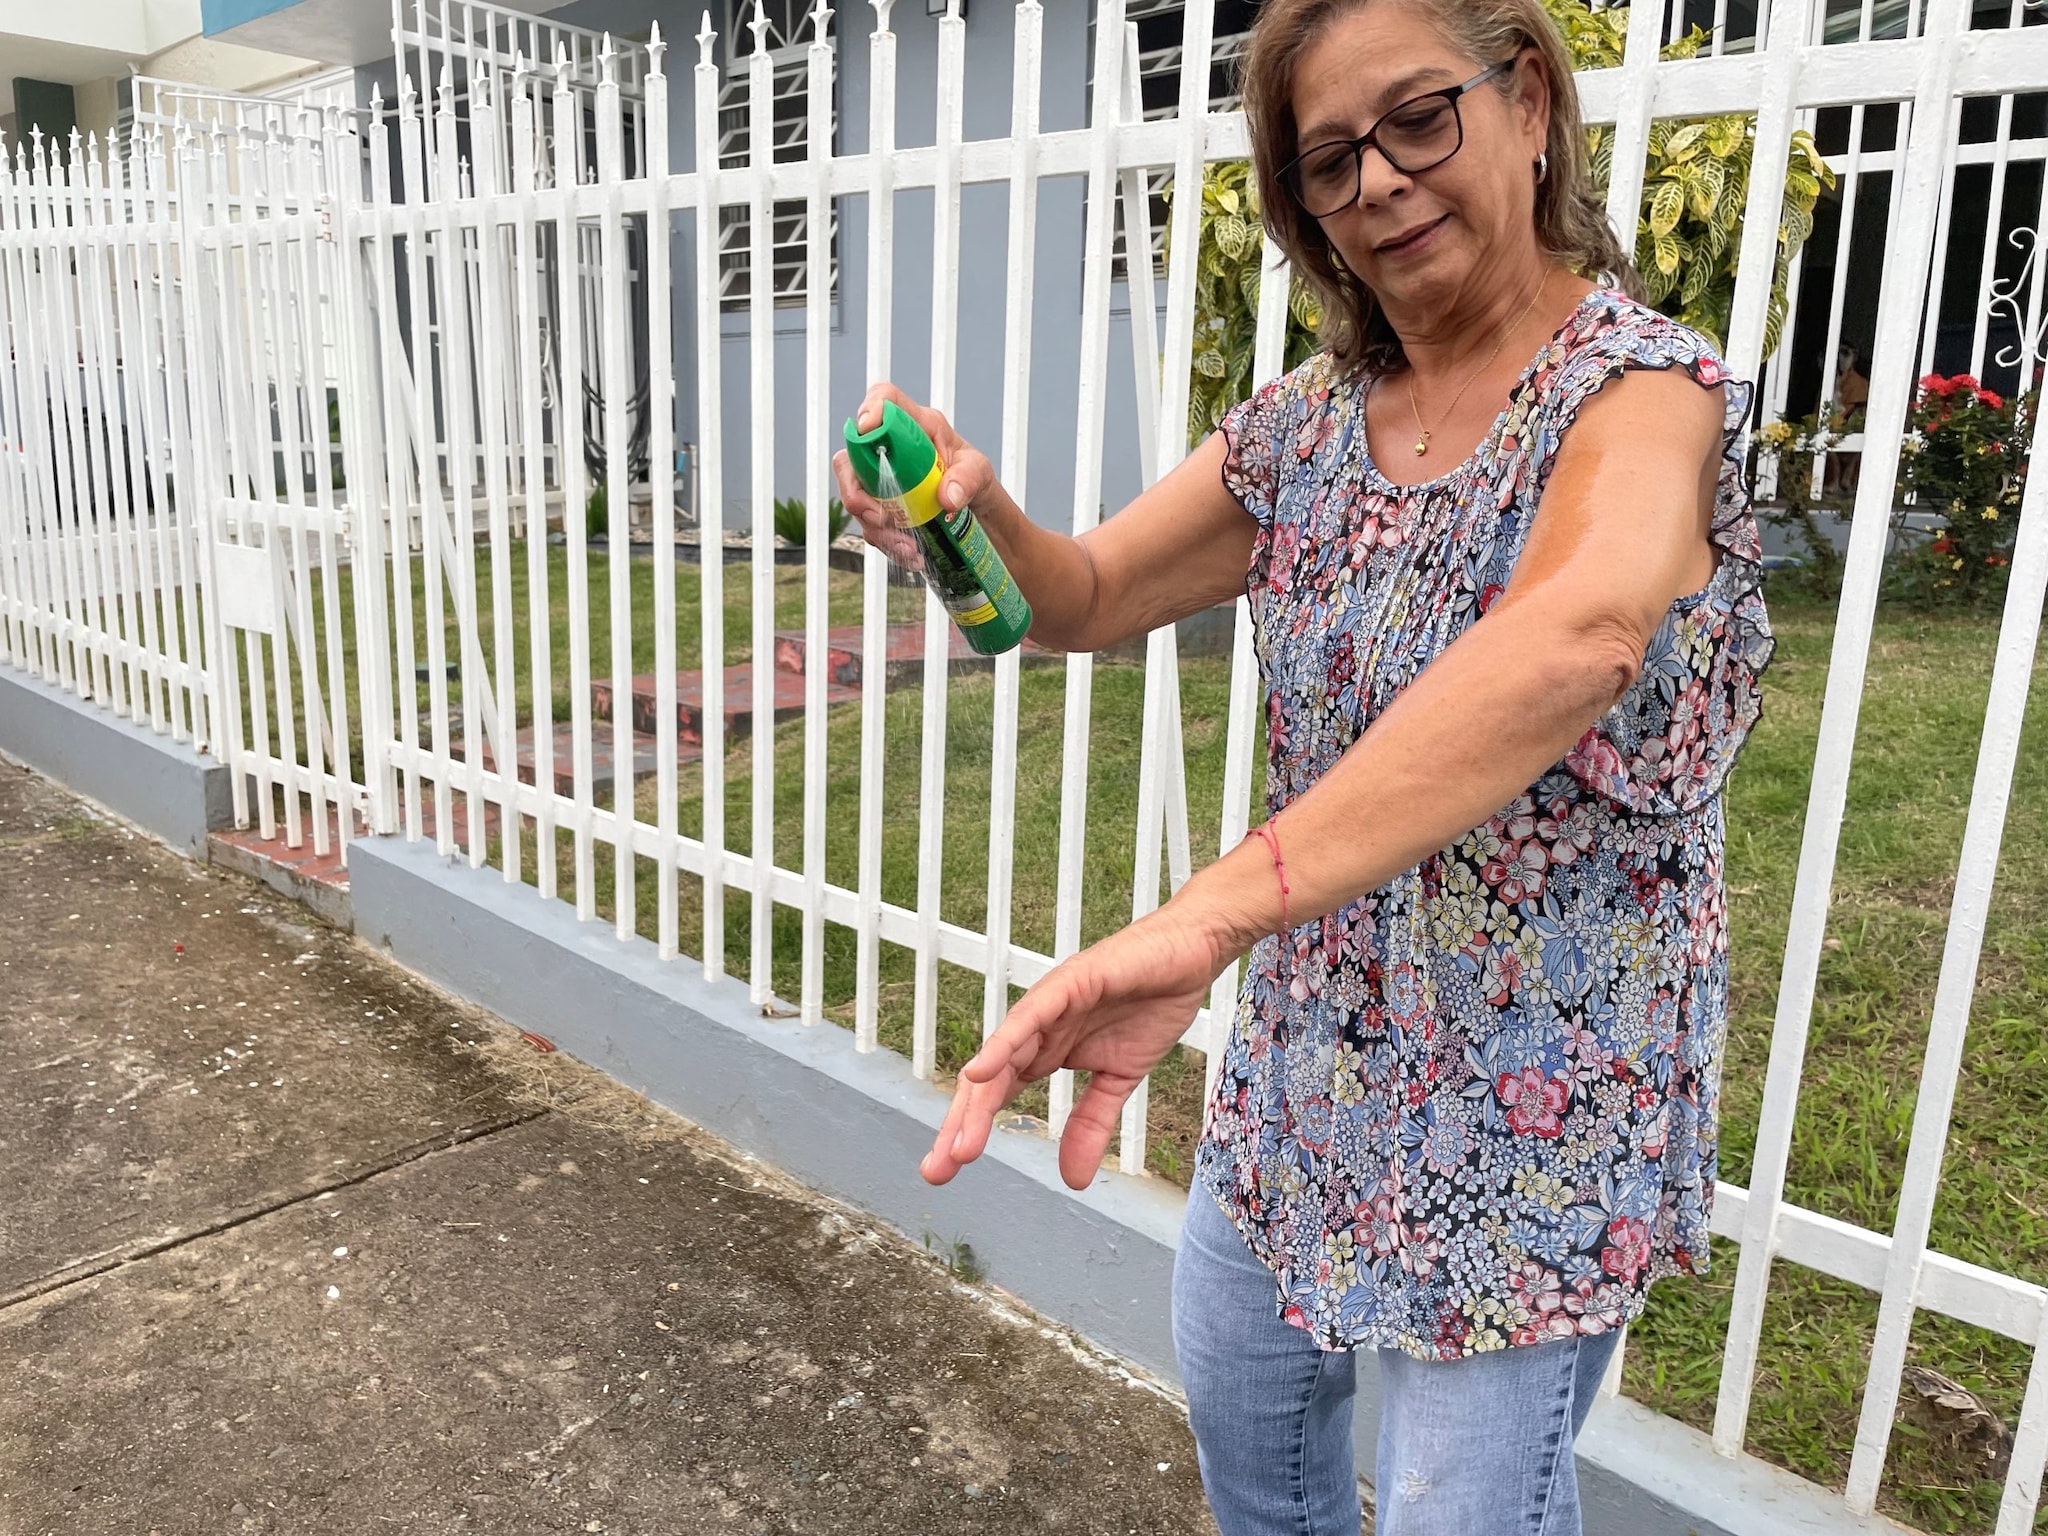 An older woman sprays insect repellent on her arm.